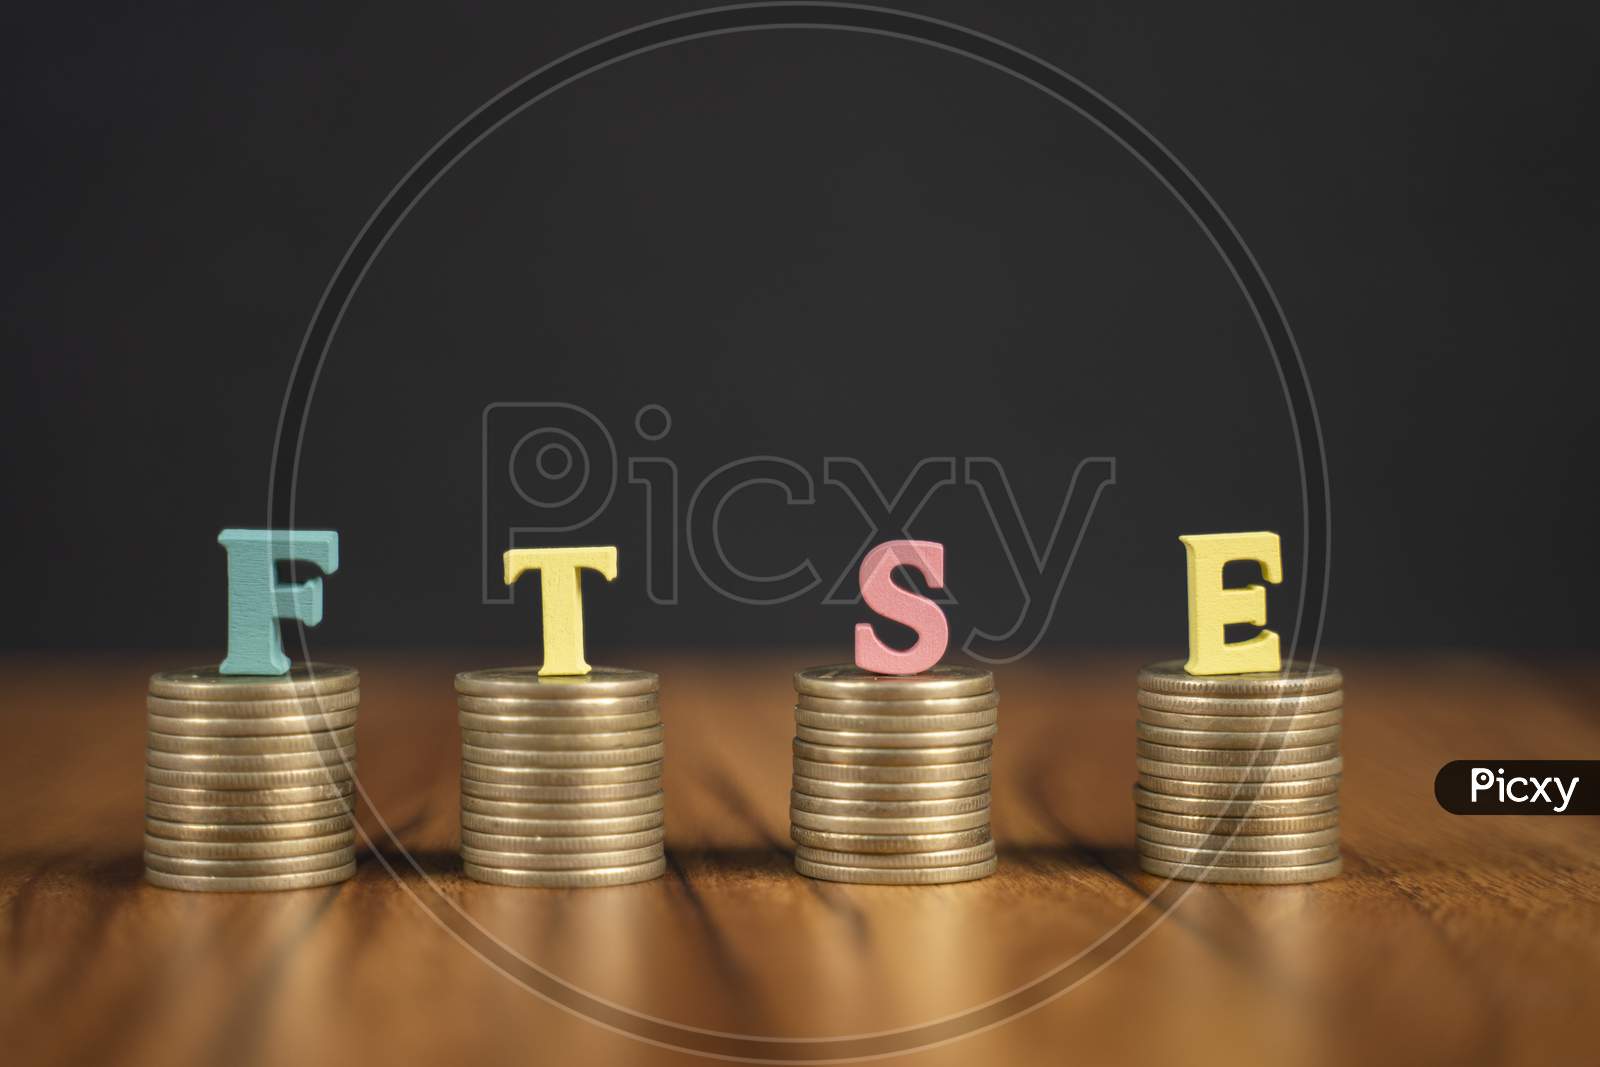 Concept Of Ftse Or Financial Times Stock Exchange Showing With Coins And Letters On Black Background.